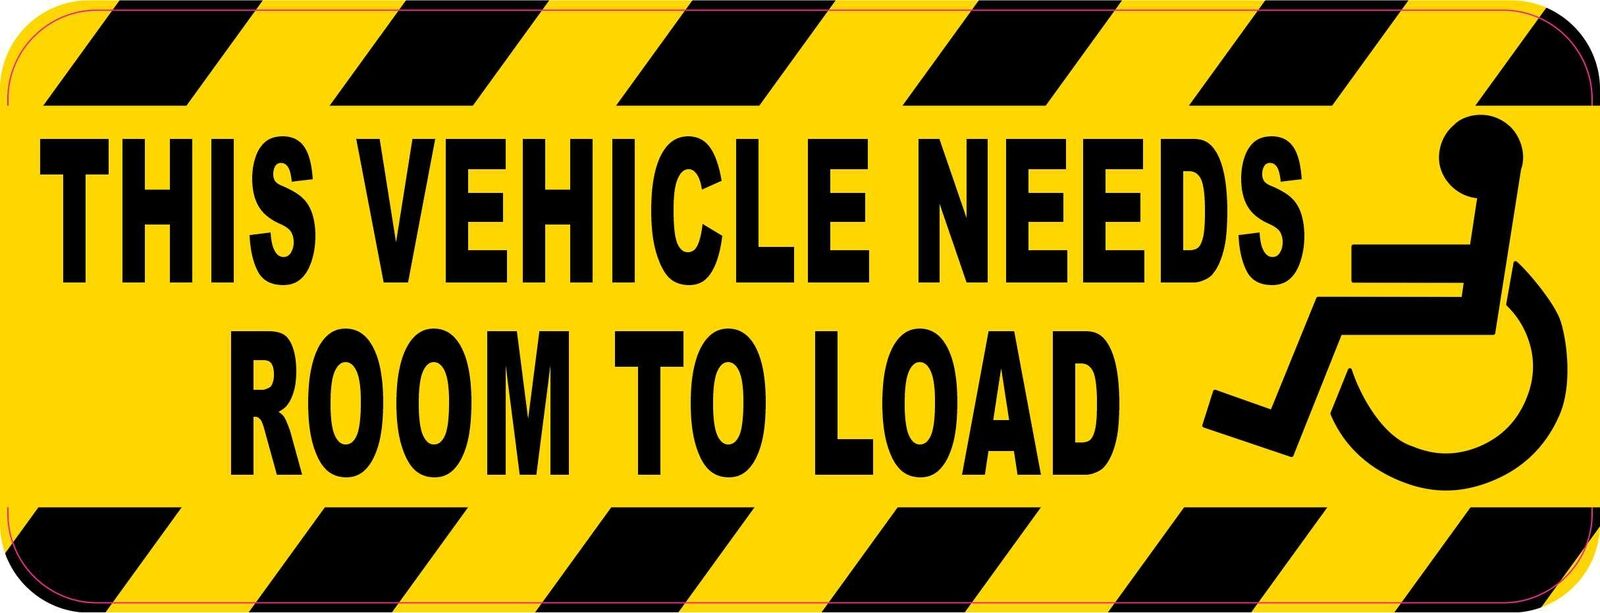 8in x 3in This Vehicle Needs Room to Load Magnet Car Truck Vehicle Magnetic Sign